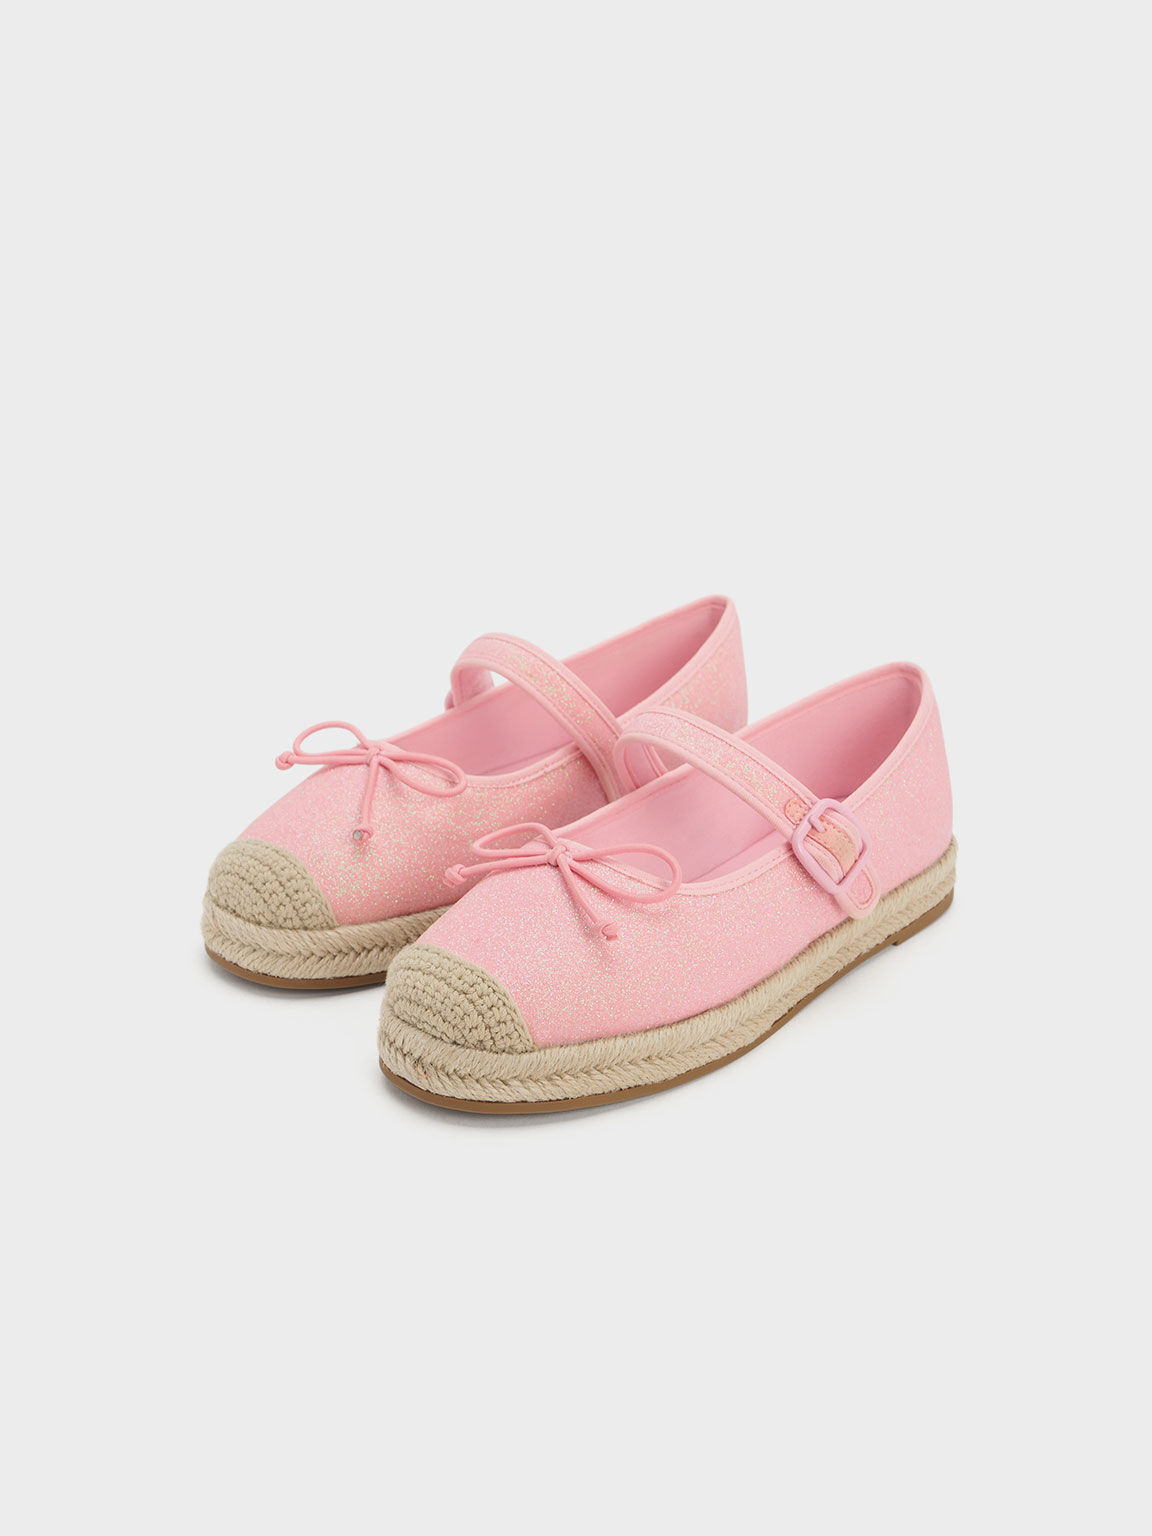 Light Pink Girls Glittered Bow Espadrilles Charles And Keith My 